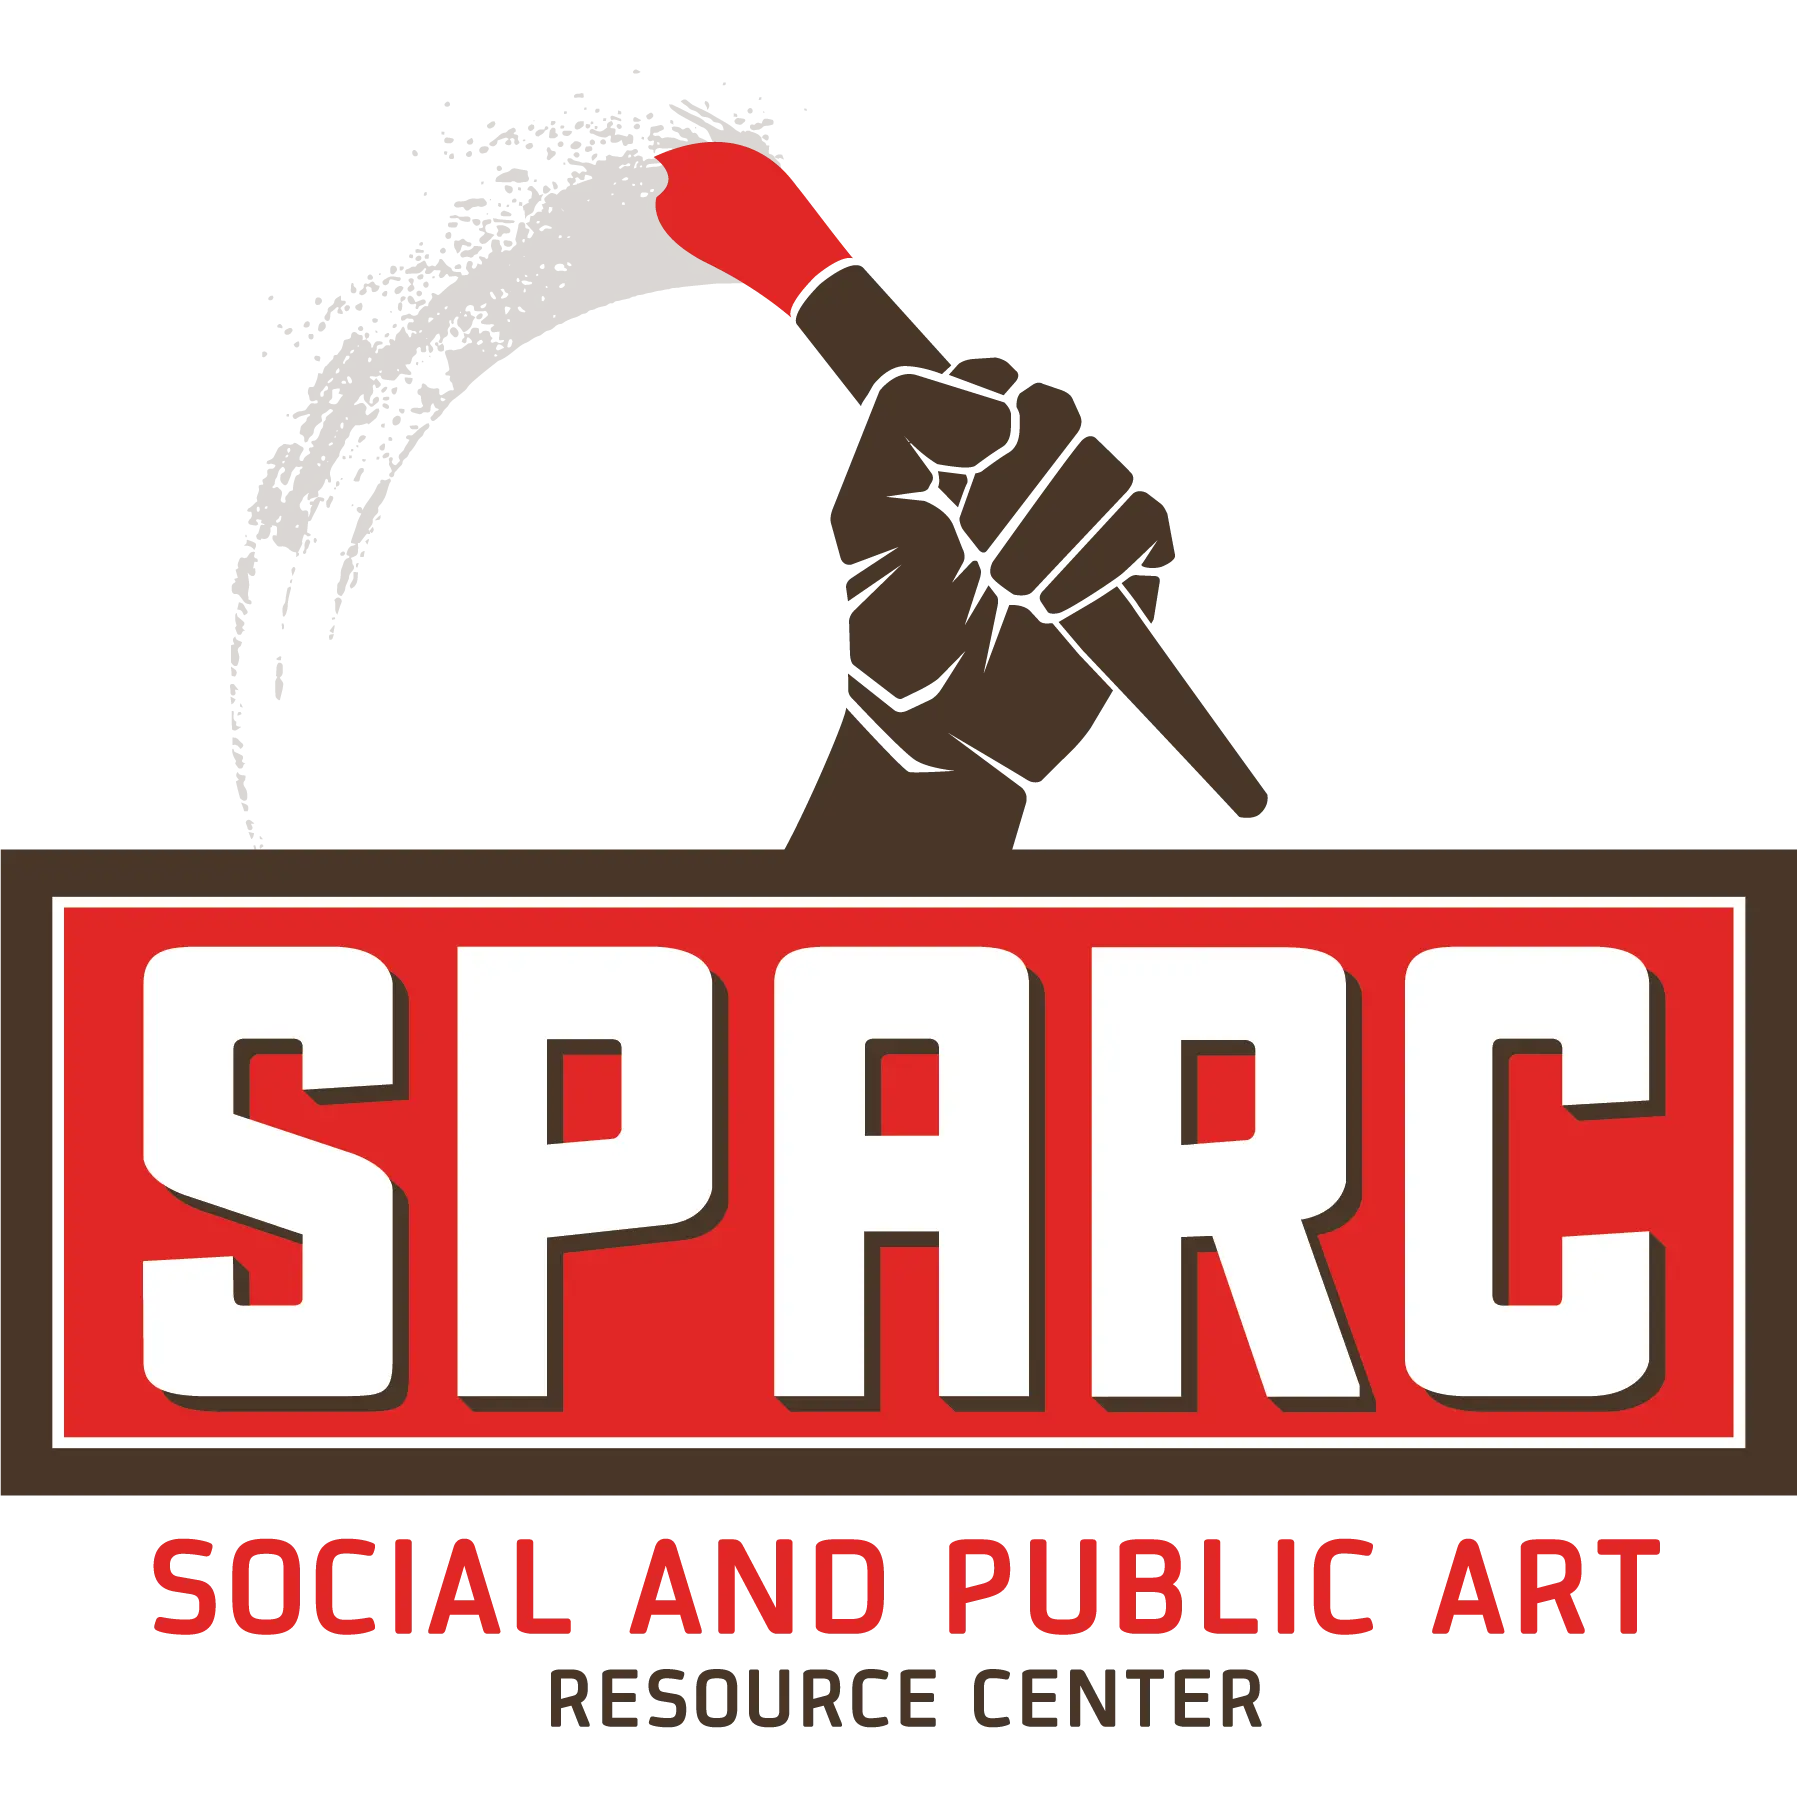 SOCIAL AND PUBLIC ART RESOURCE CENTER